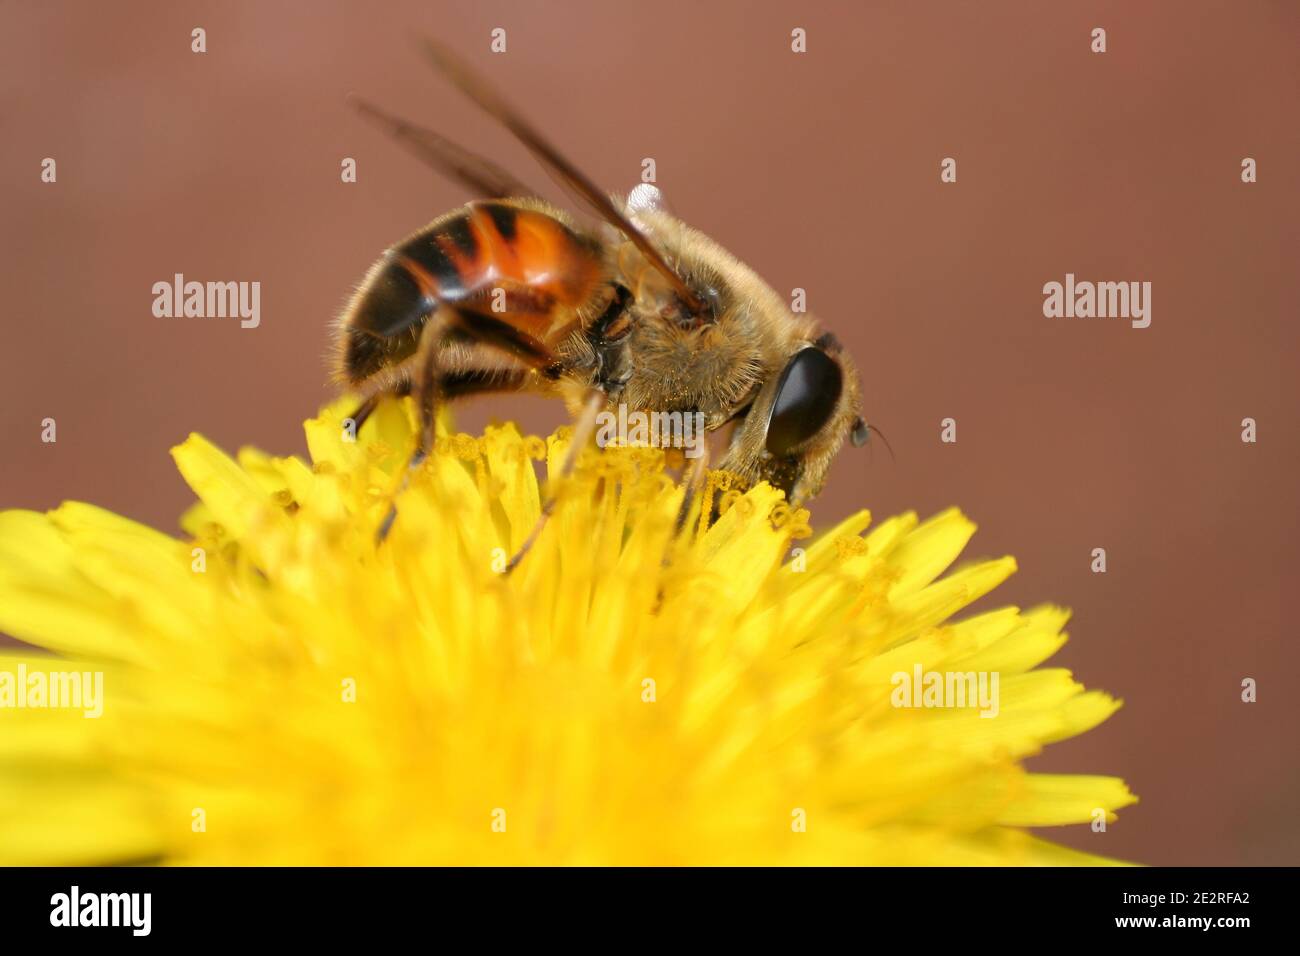 Australian native Bee collecting pollen from a Dandelion flower. Stock Photo